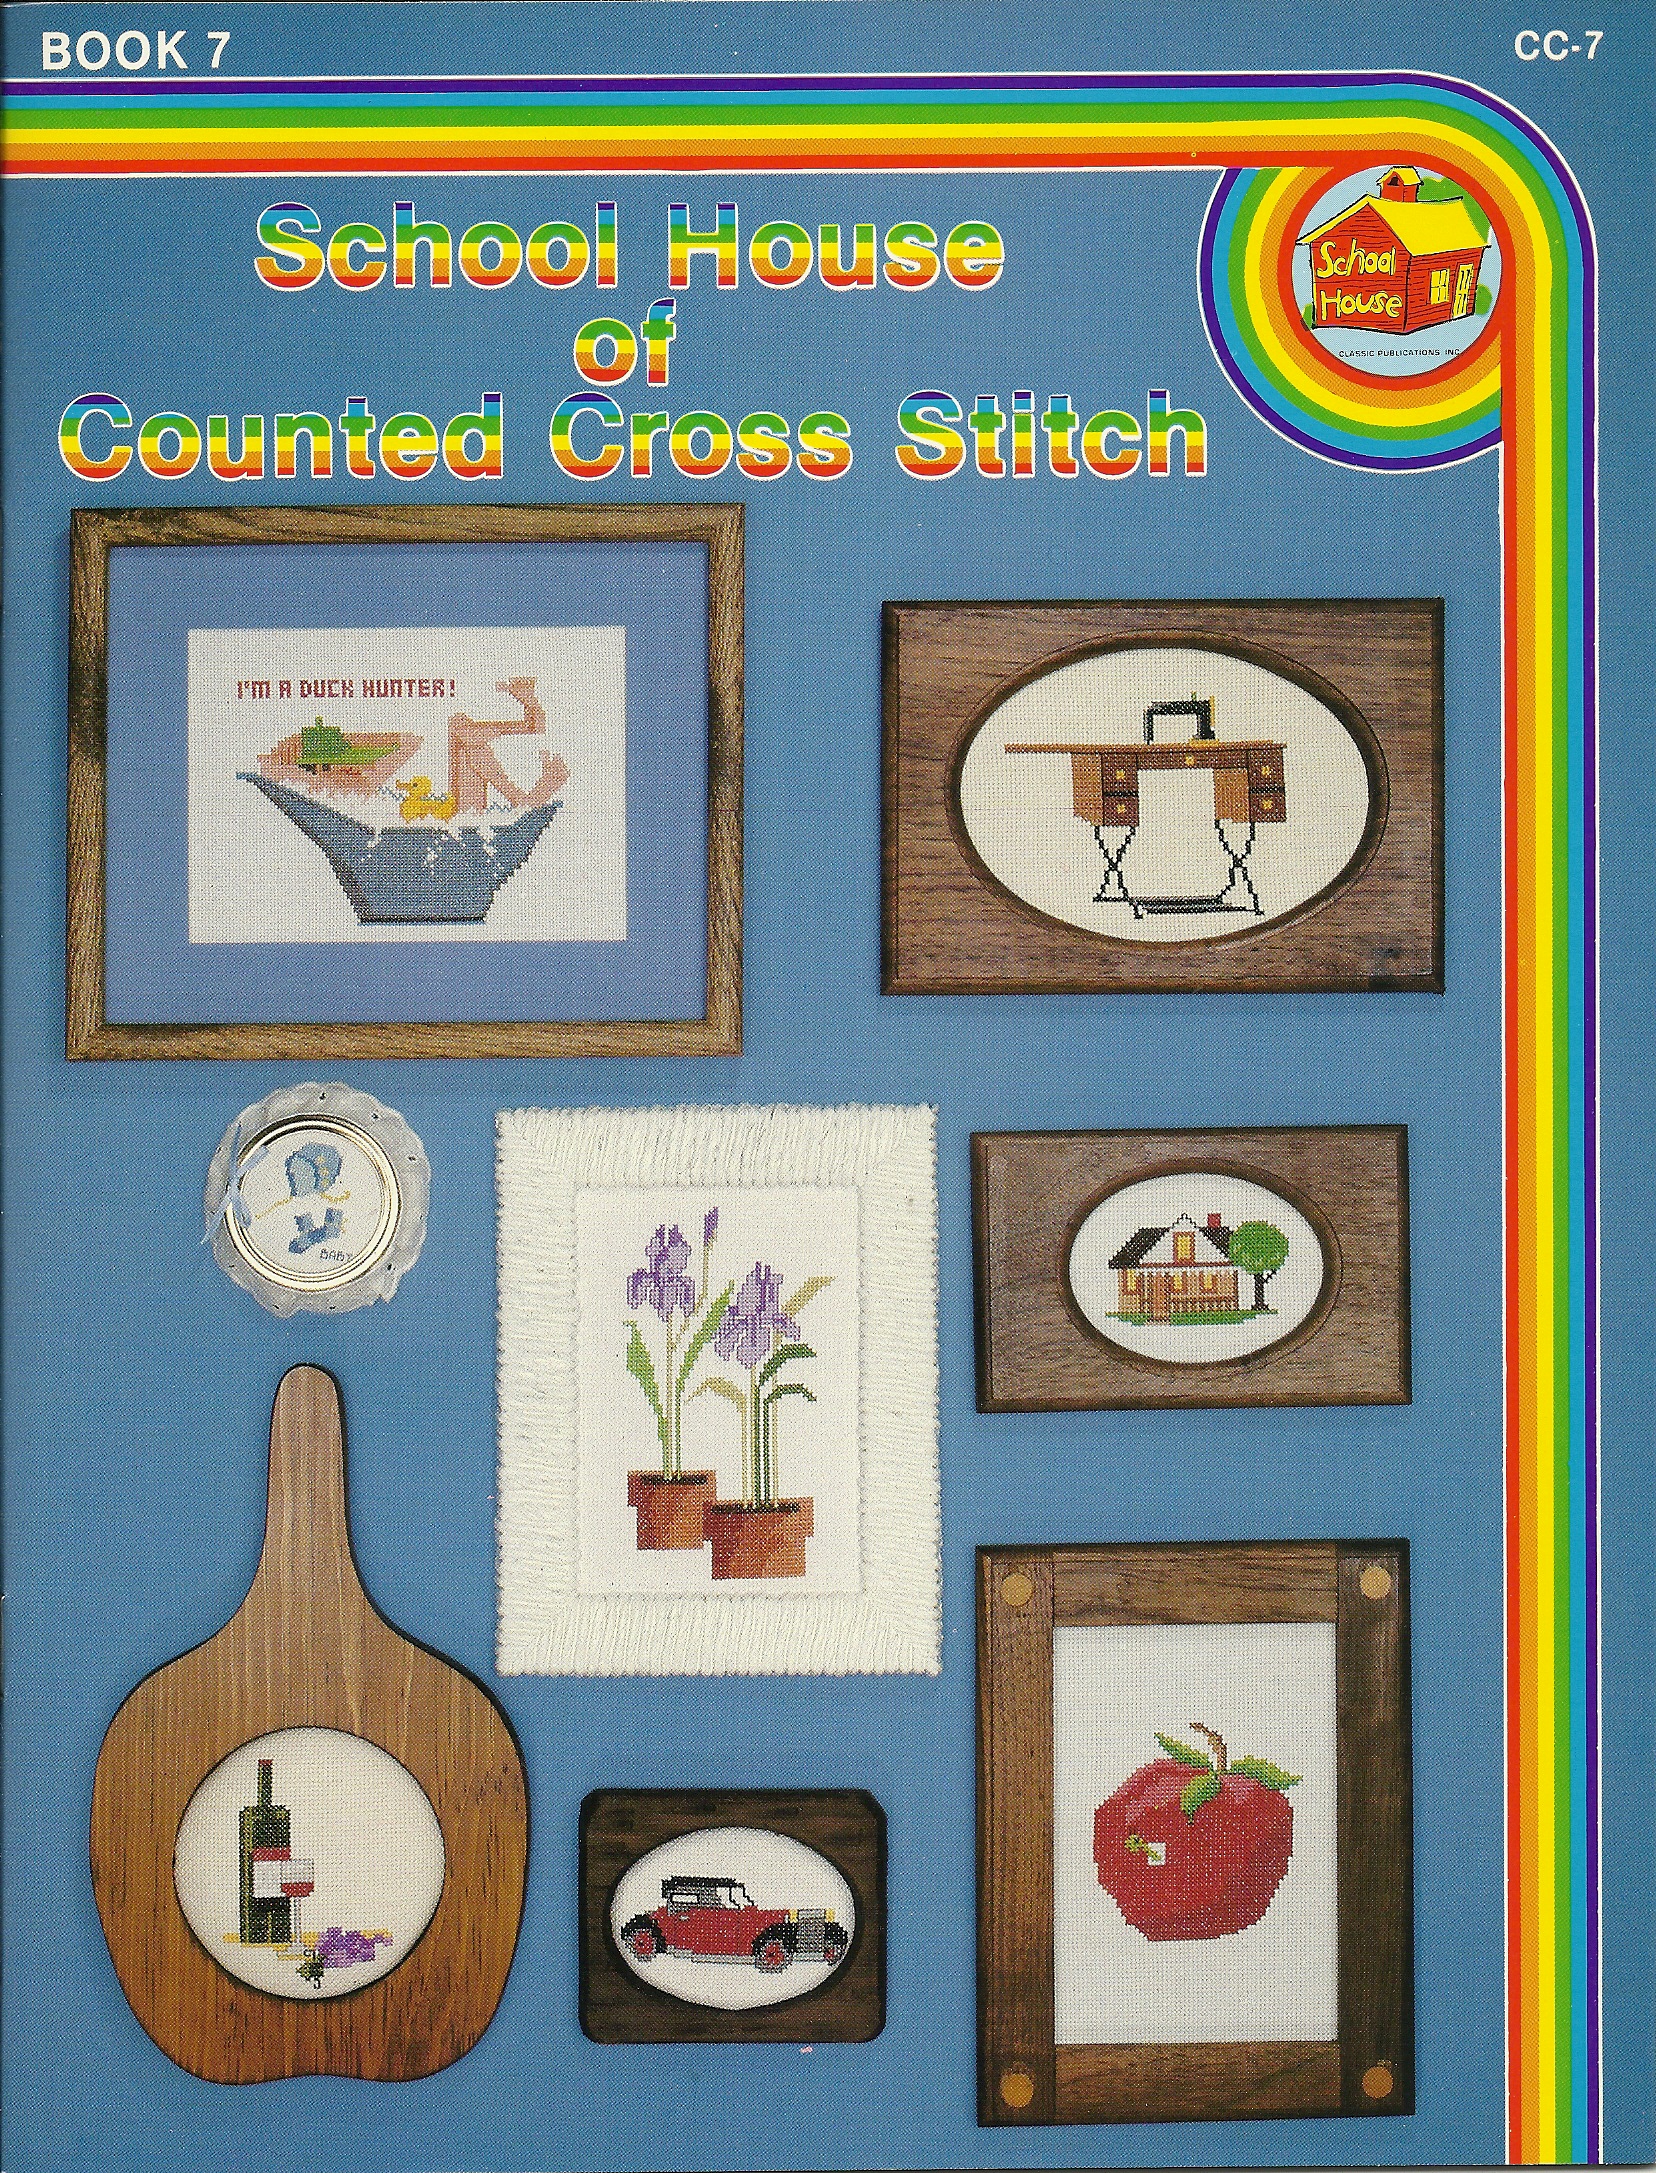 School House of Counted Cross Stitch  Book 7